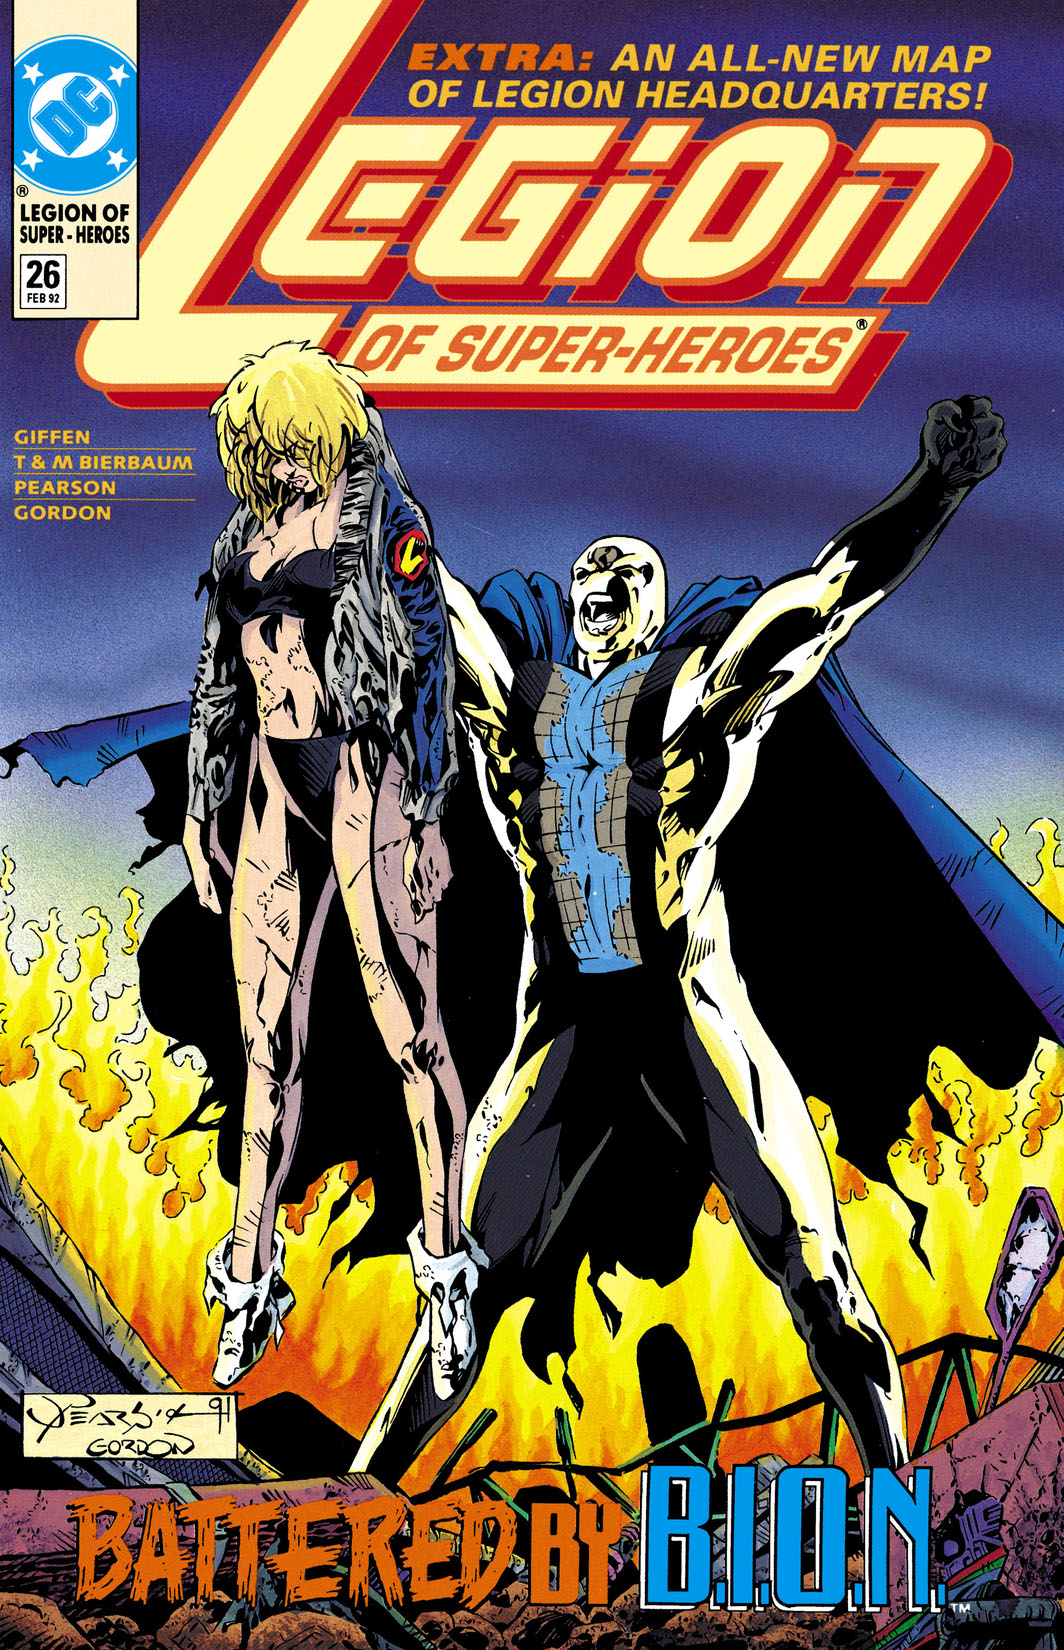 Legion of Super-Heroes (1989-) #26 preview images